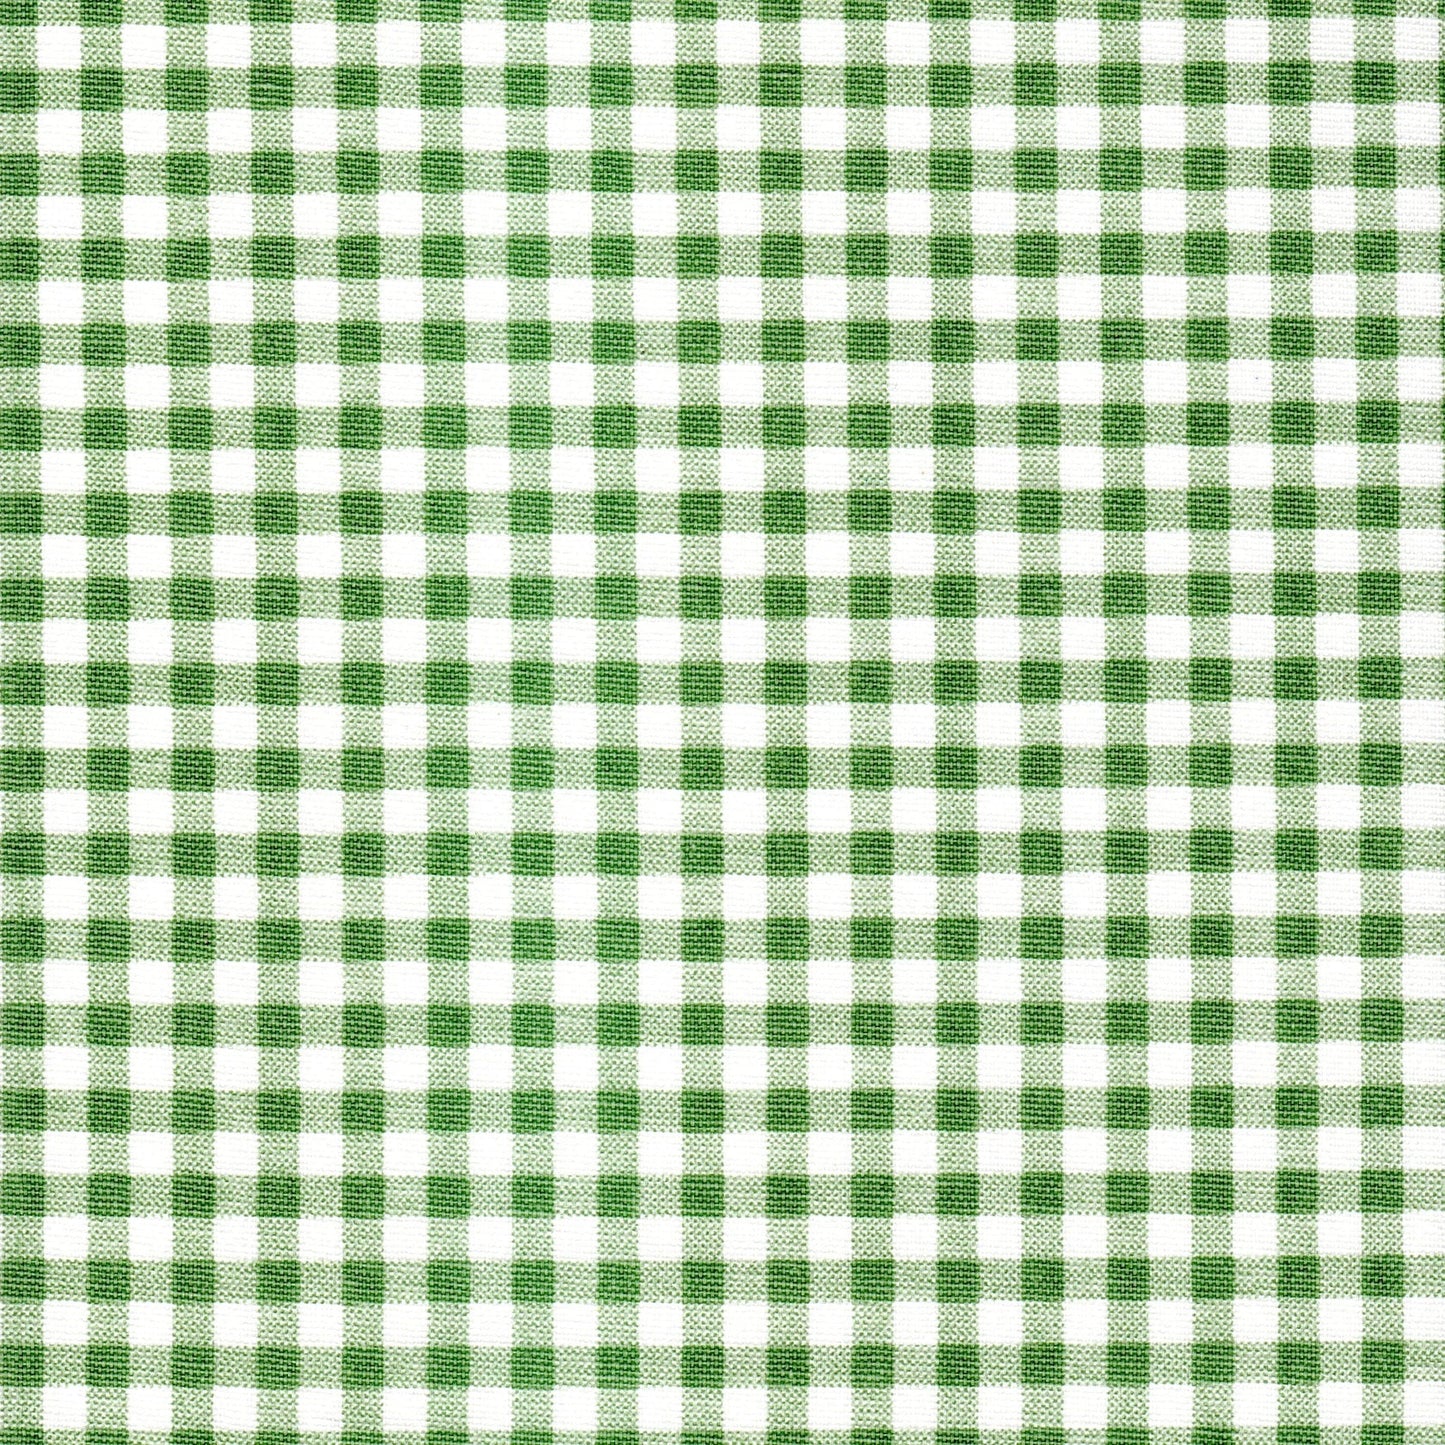 Tailored Crib Skirt in Sage Green Large Gingham Check on White Plaid